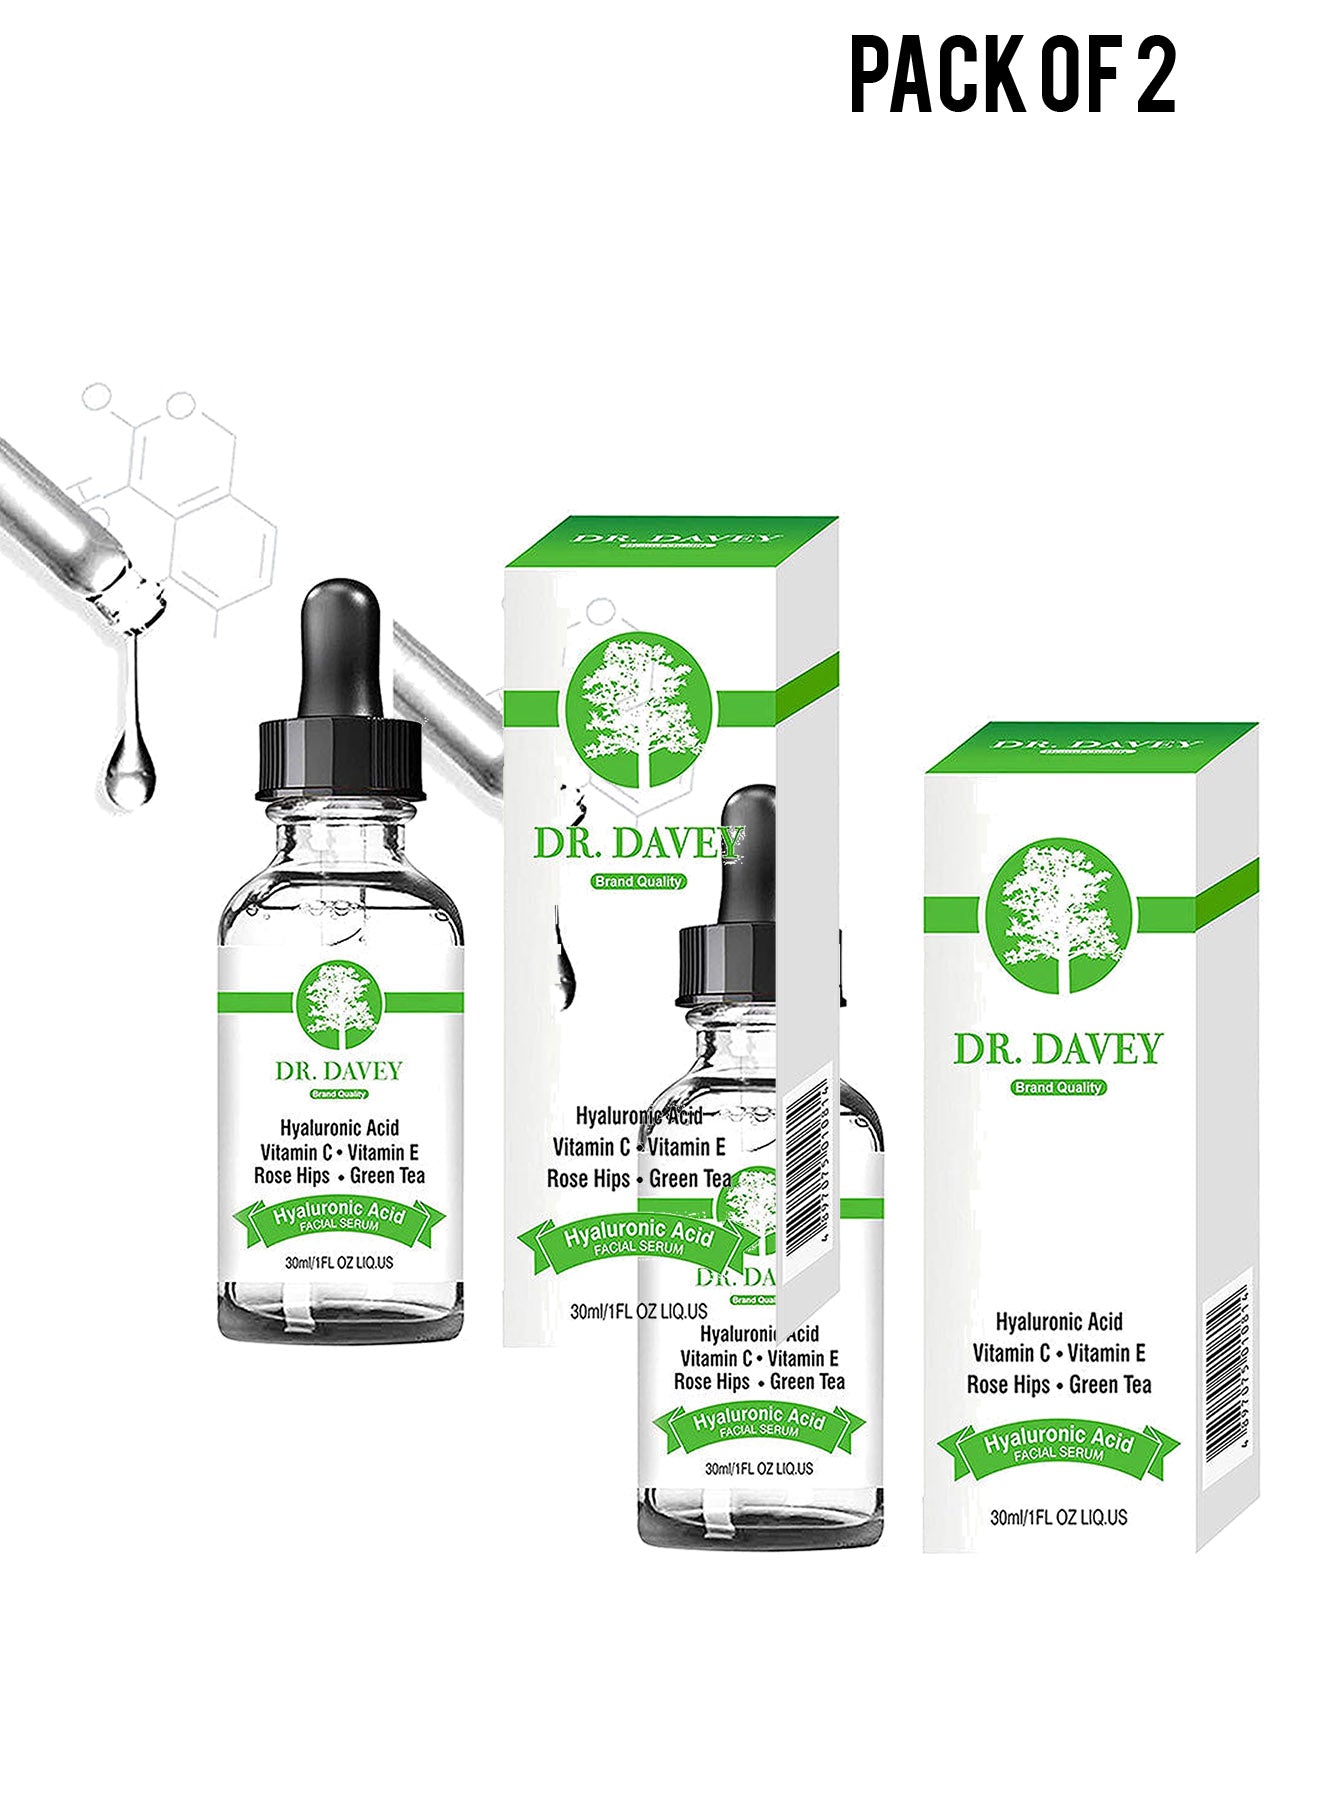 Dr Davey Hyaluronic Acid Serum  Hydration  Moisture Filled Hyaluronic Acid Facial Serum with Vitamin C  Vitamin E 30ml1oz Value Pack of 2 